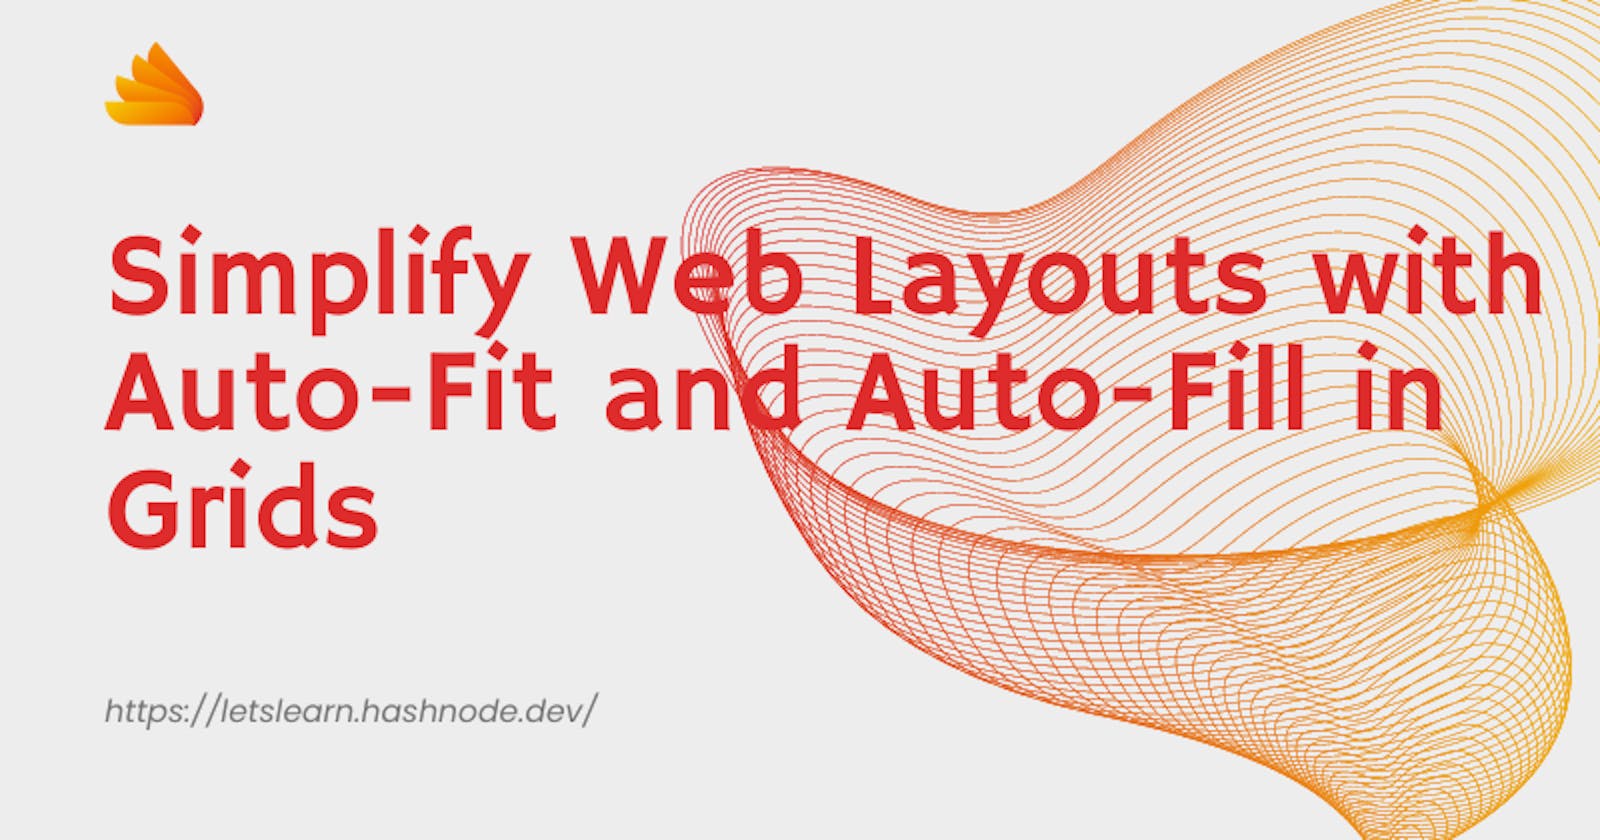 Simplify Web Layouts with Auto-Fit and Auto-Fill in Grids